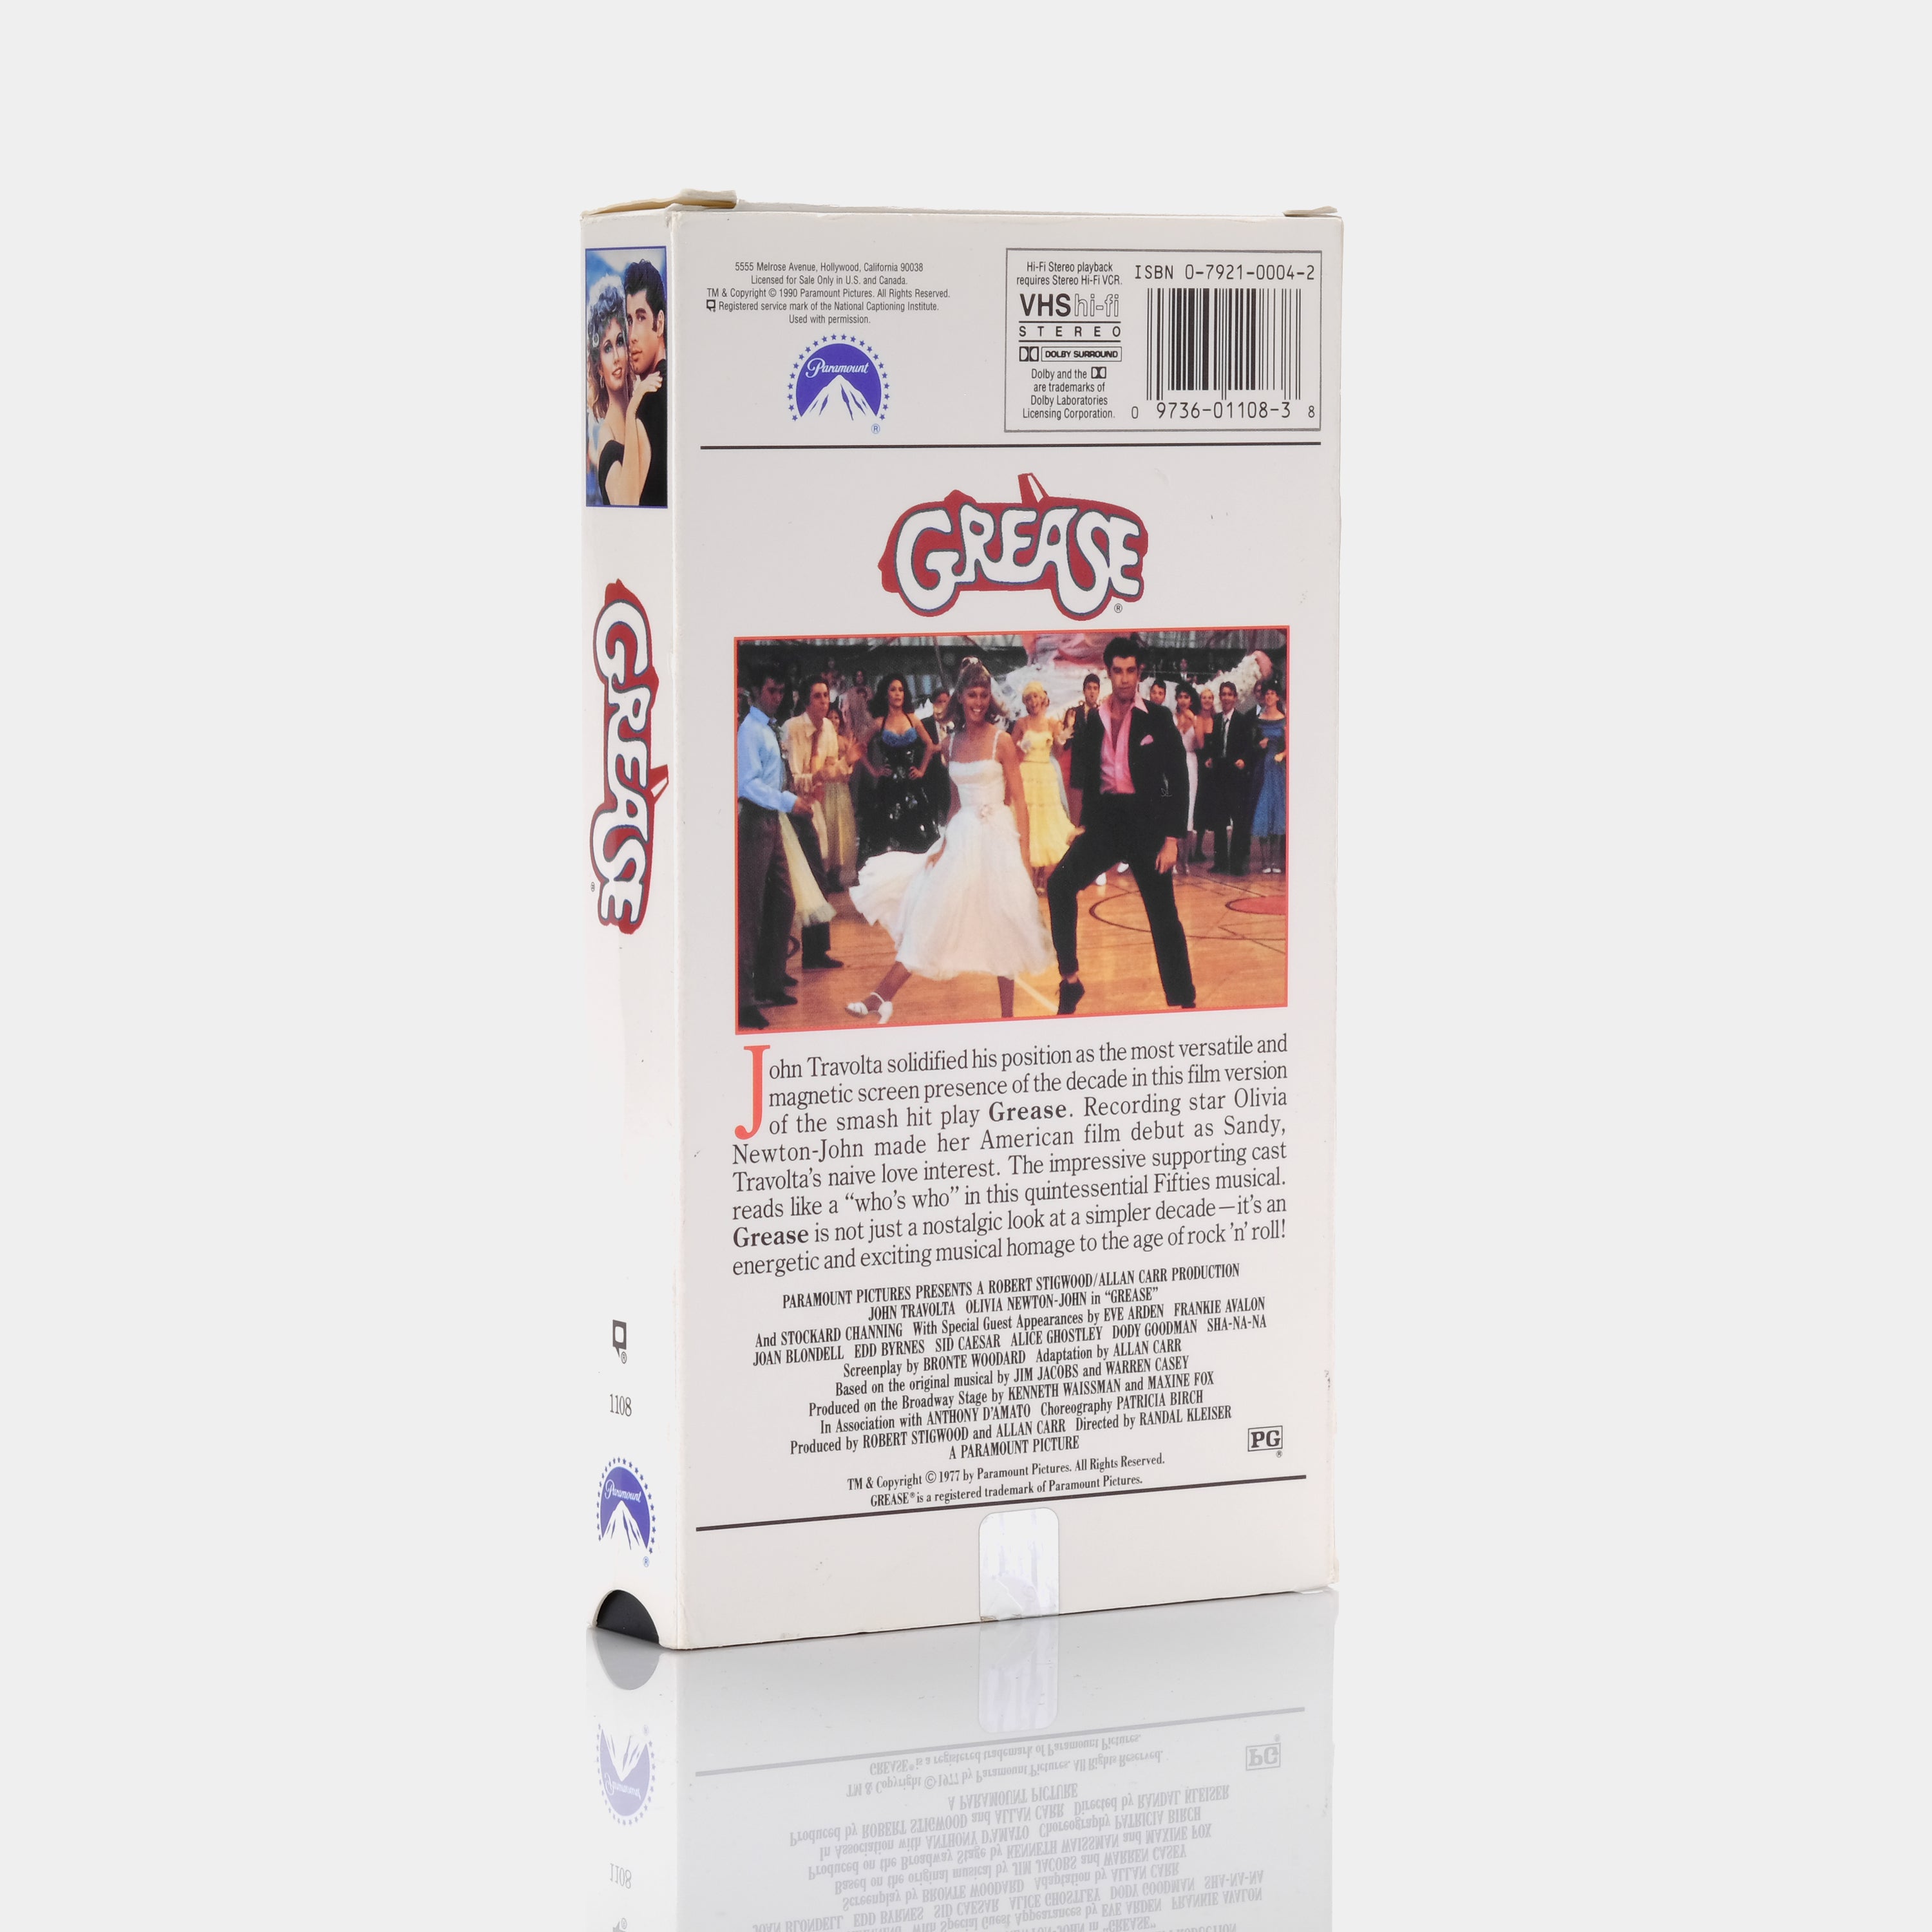 Grease VHS Tape